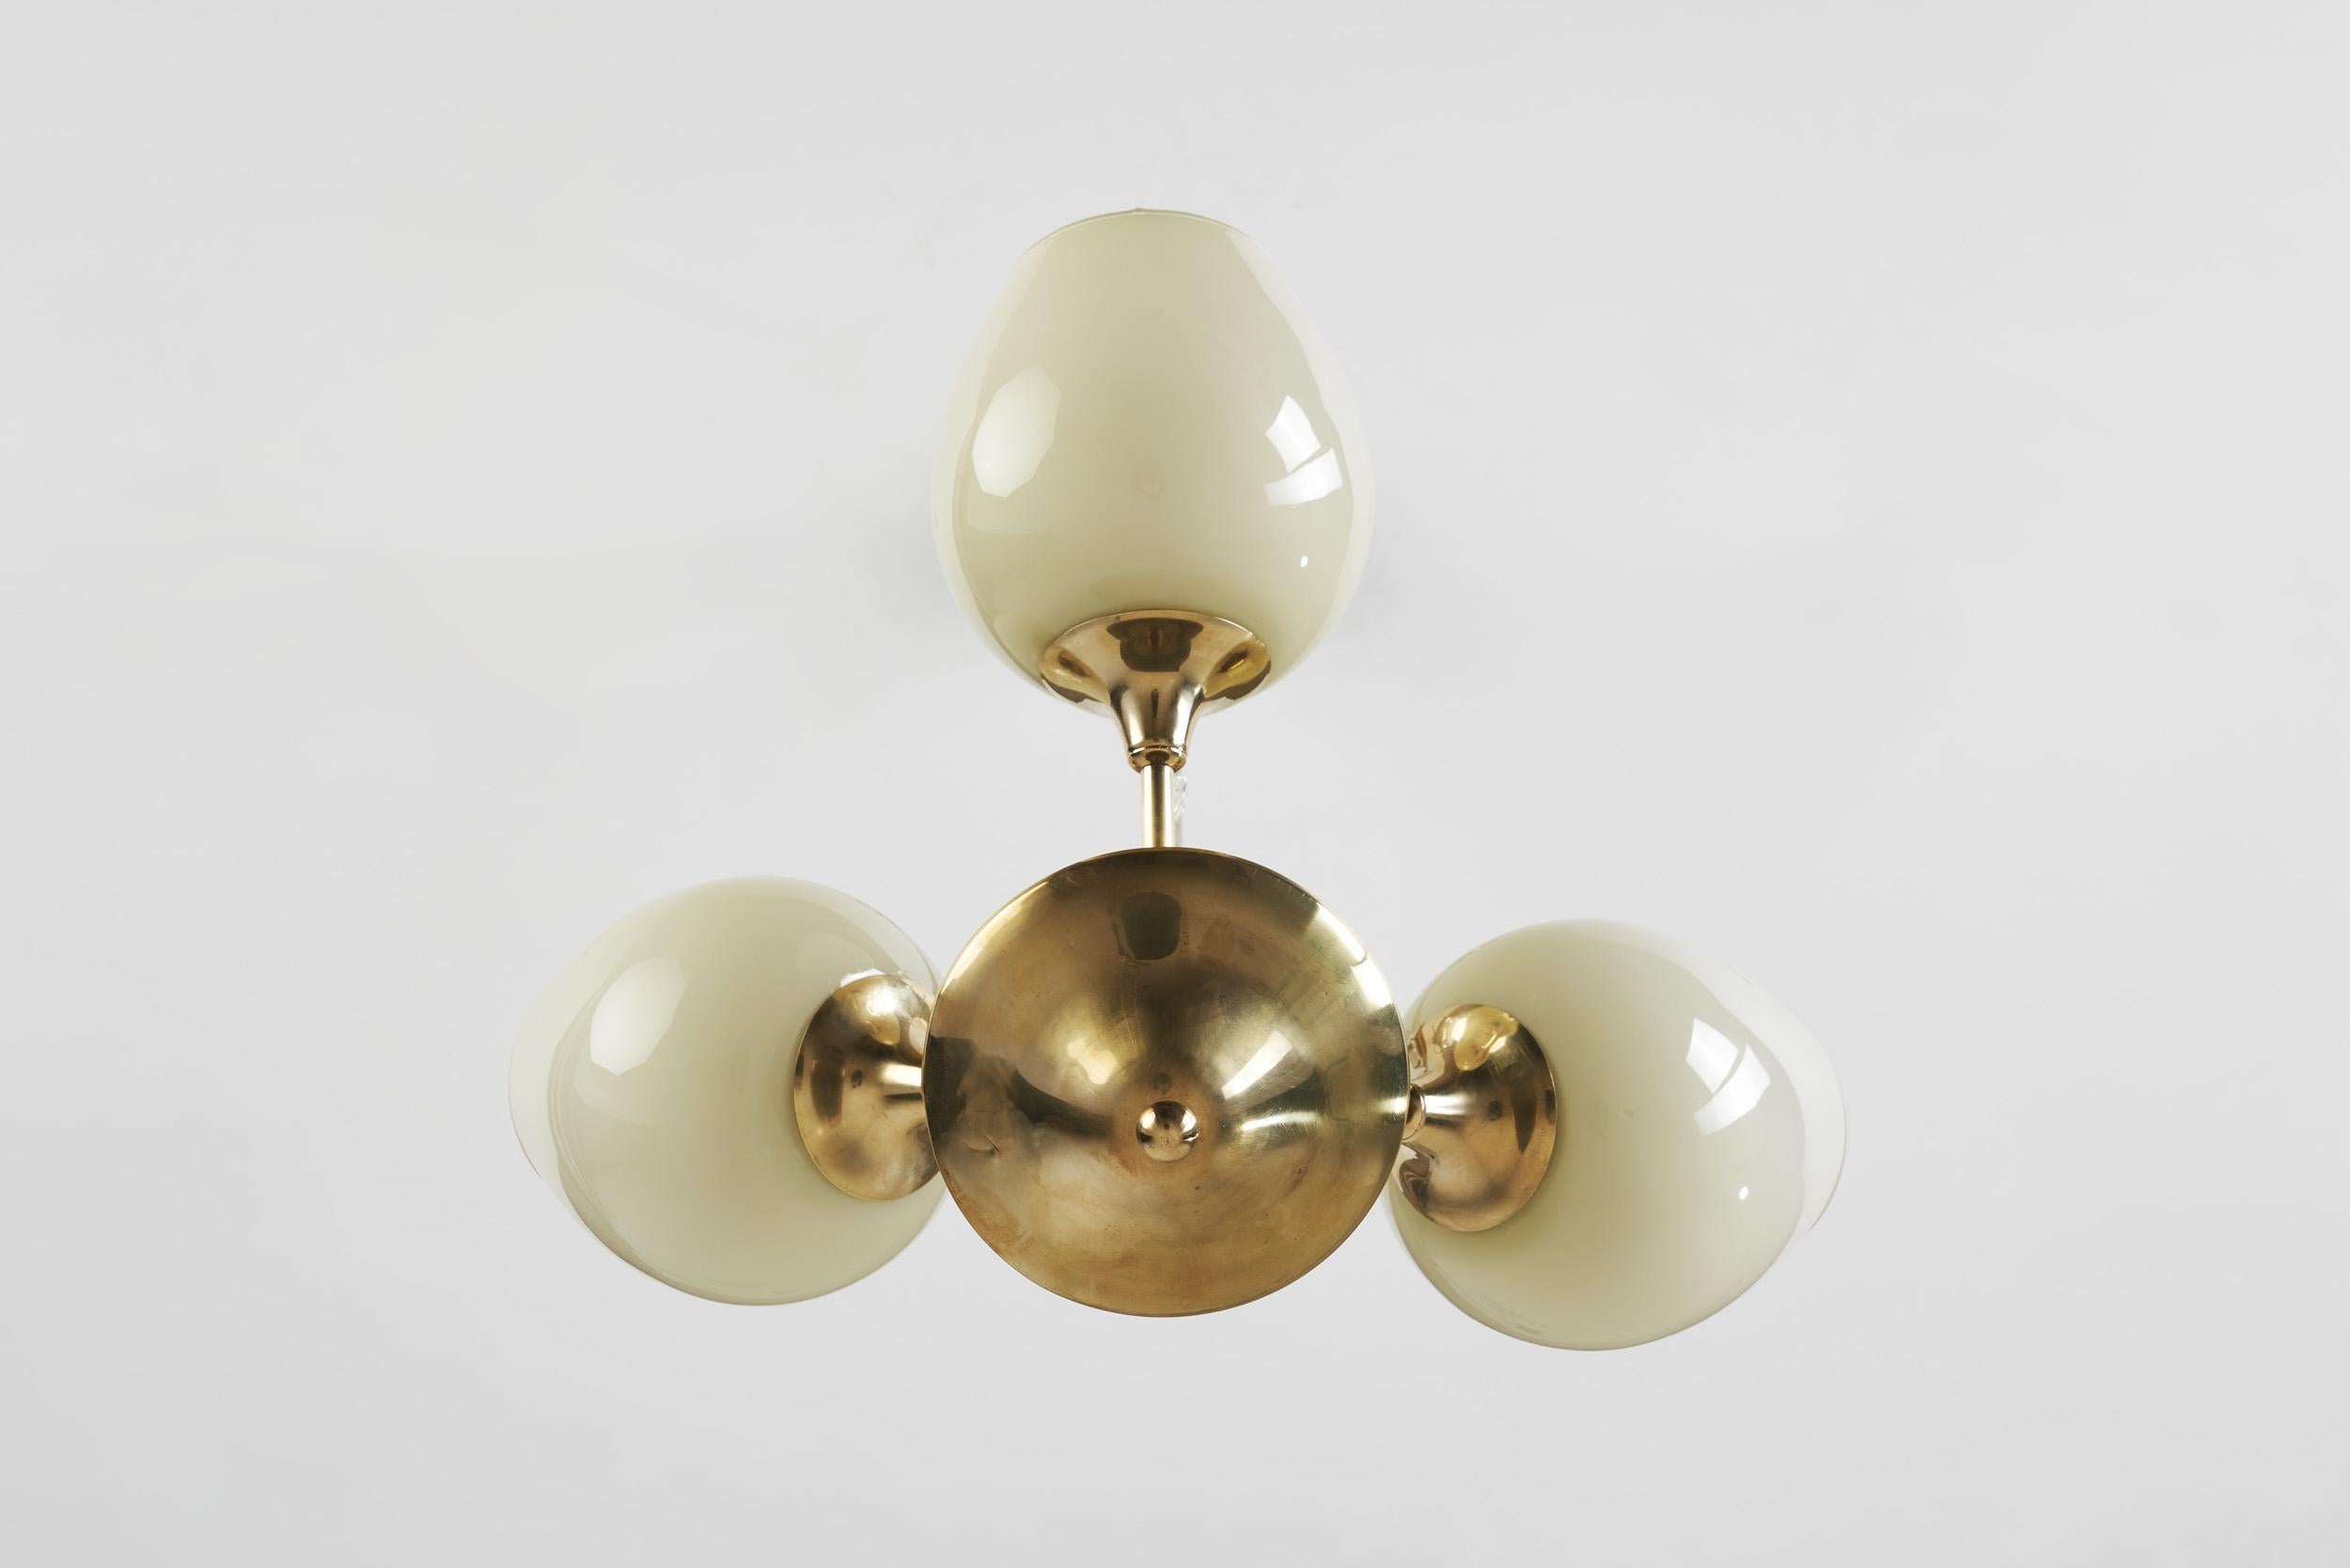 Brass Ceiling Lamp with Opal Shades by Itsu 'Attr.', Finland, ca 1950s For Sale 10